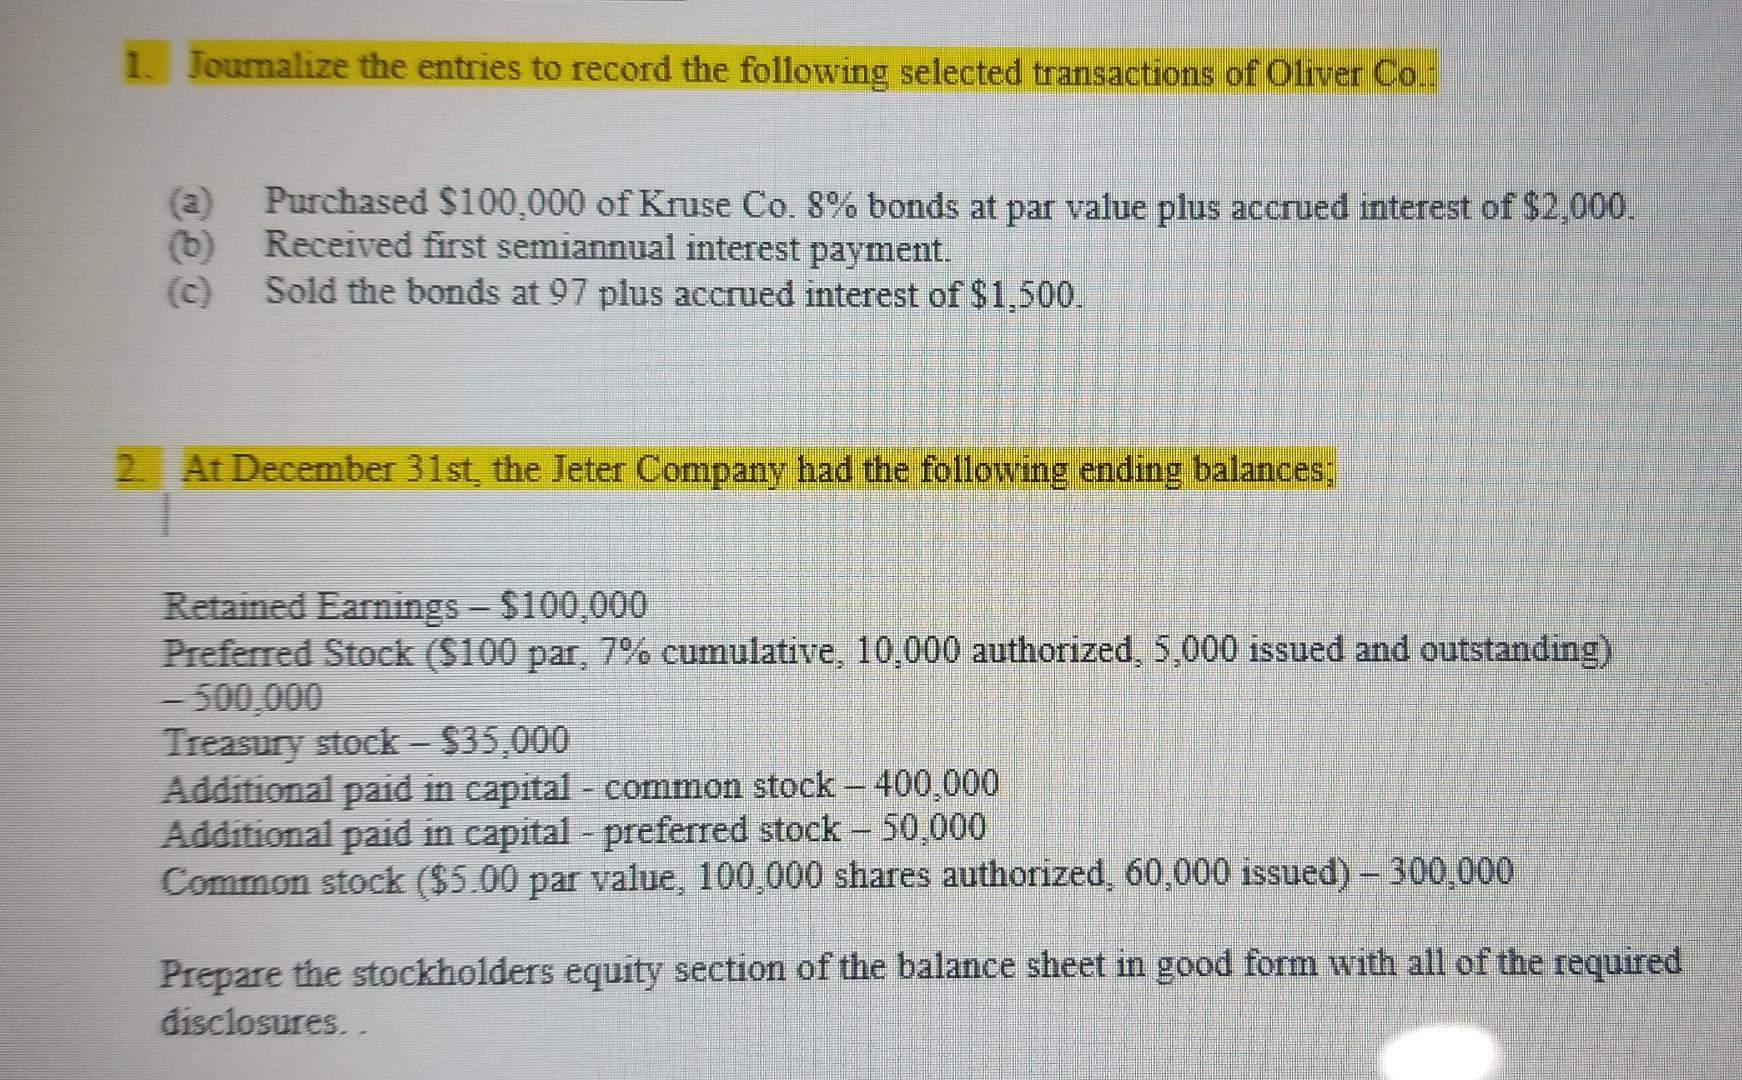 1. Toumalize the entries to record the following selected transactions of Oliver Co..(6)(c)Purchased $100,000 of Kruse Co.